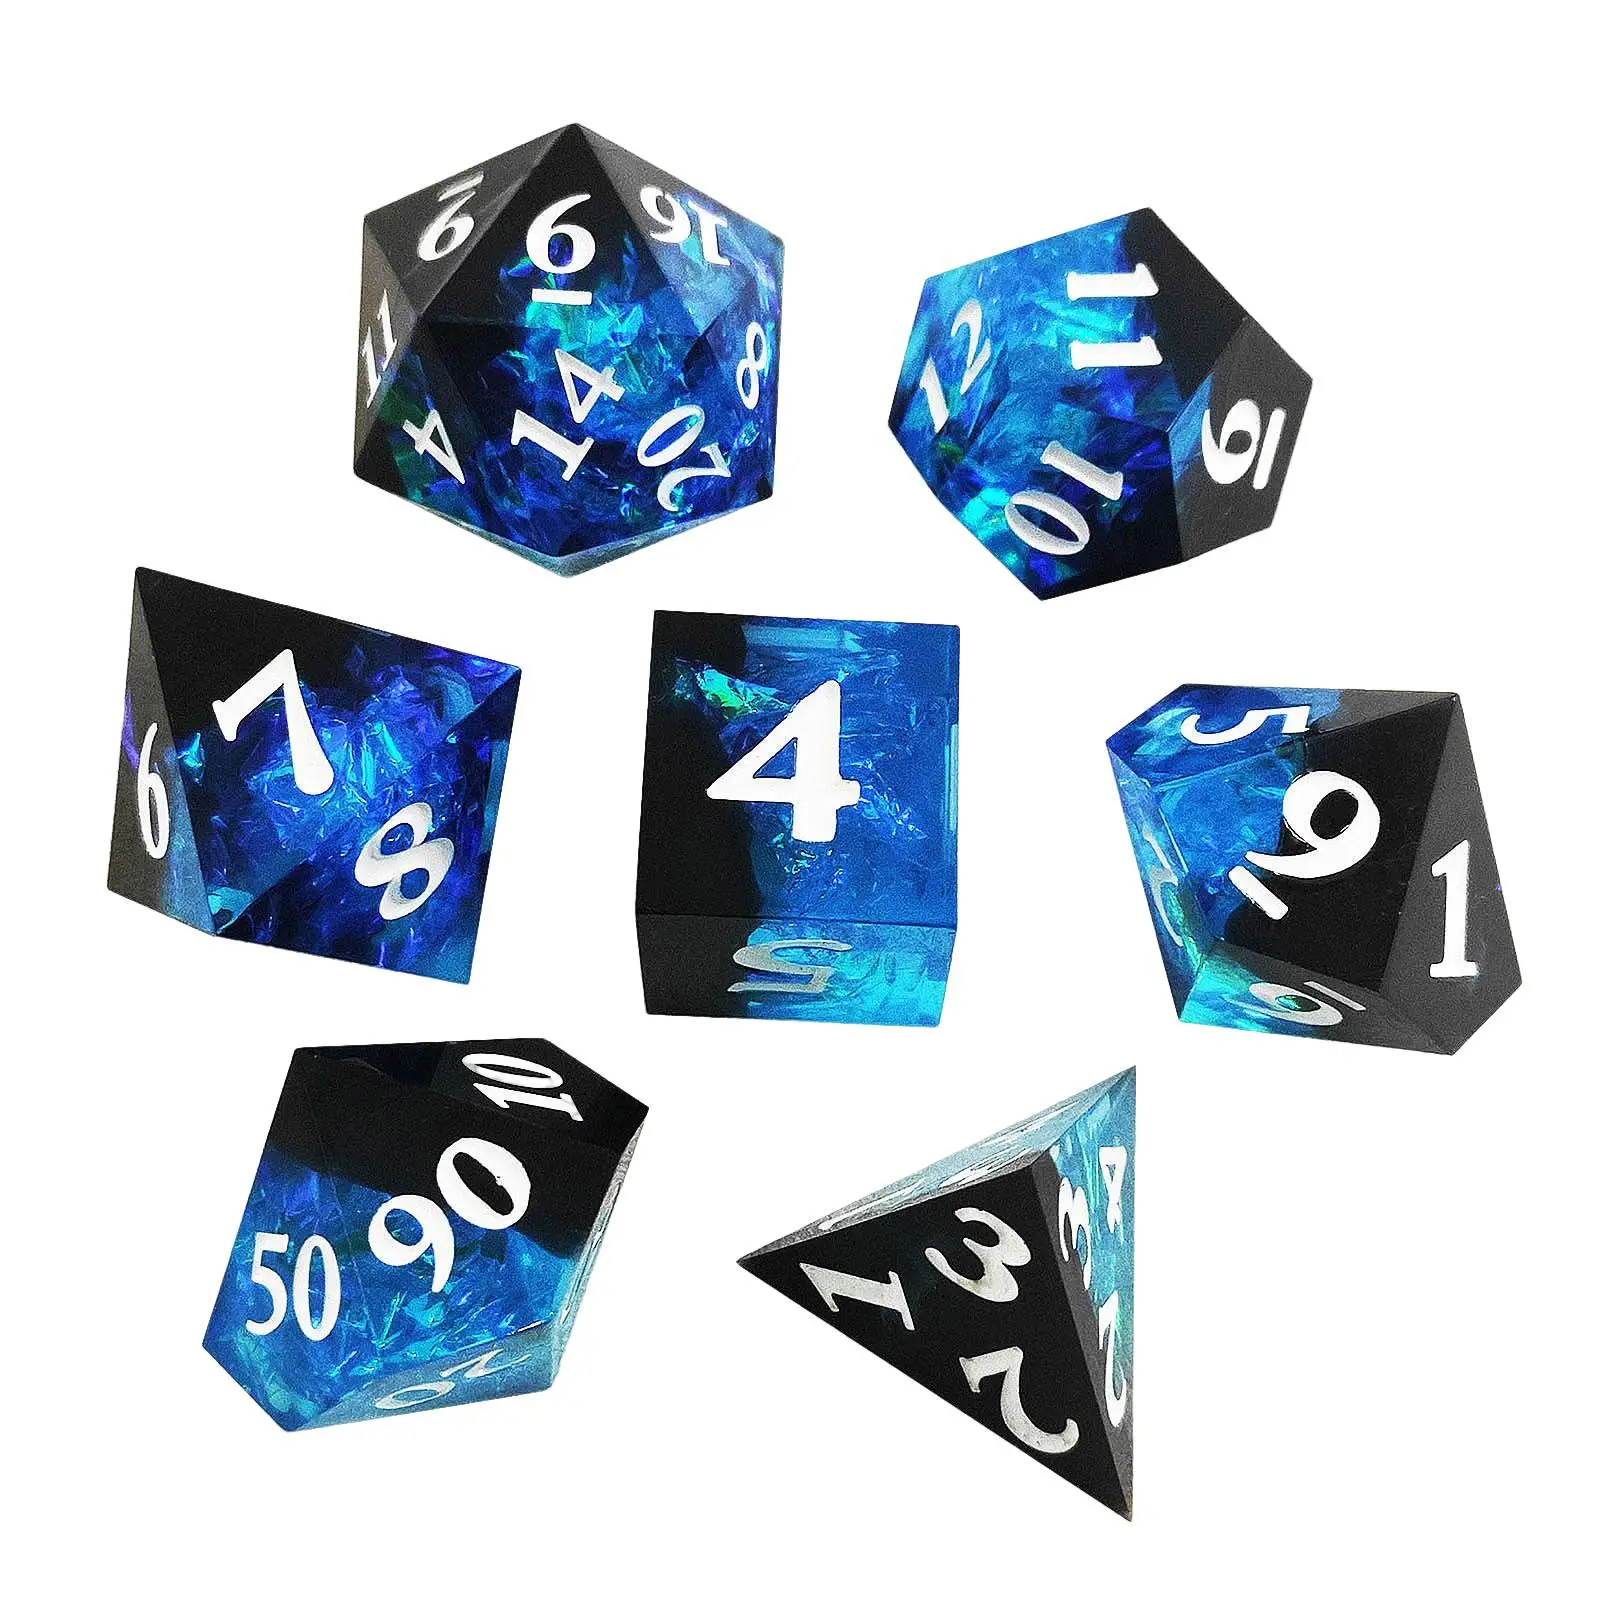 7Pcs Resin Polyhedral Dice D4 D6 D8 D10 D12 D20 Dice Game Party Game Family Table Game for Role Playing Game Cafe Table Board